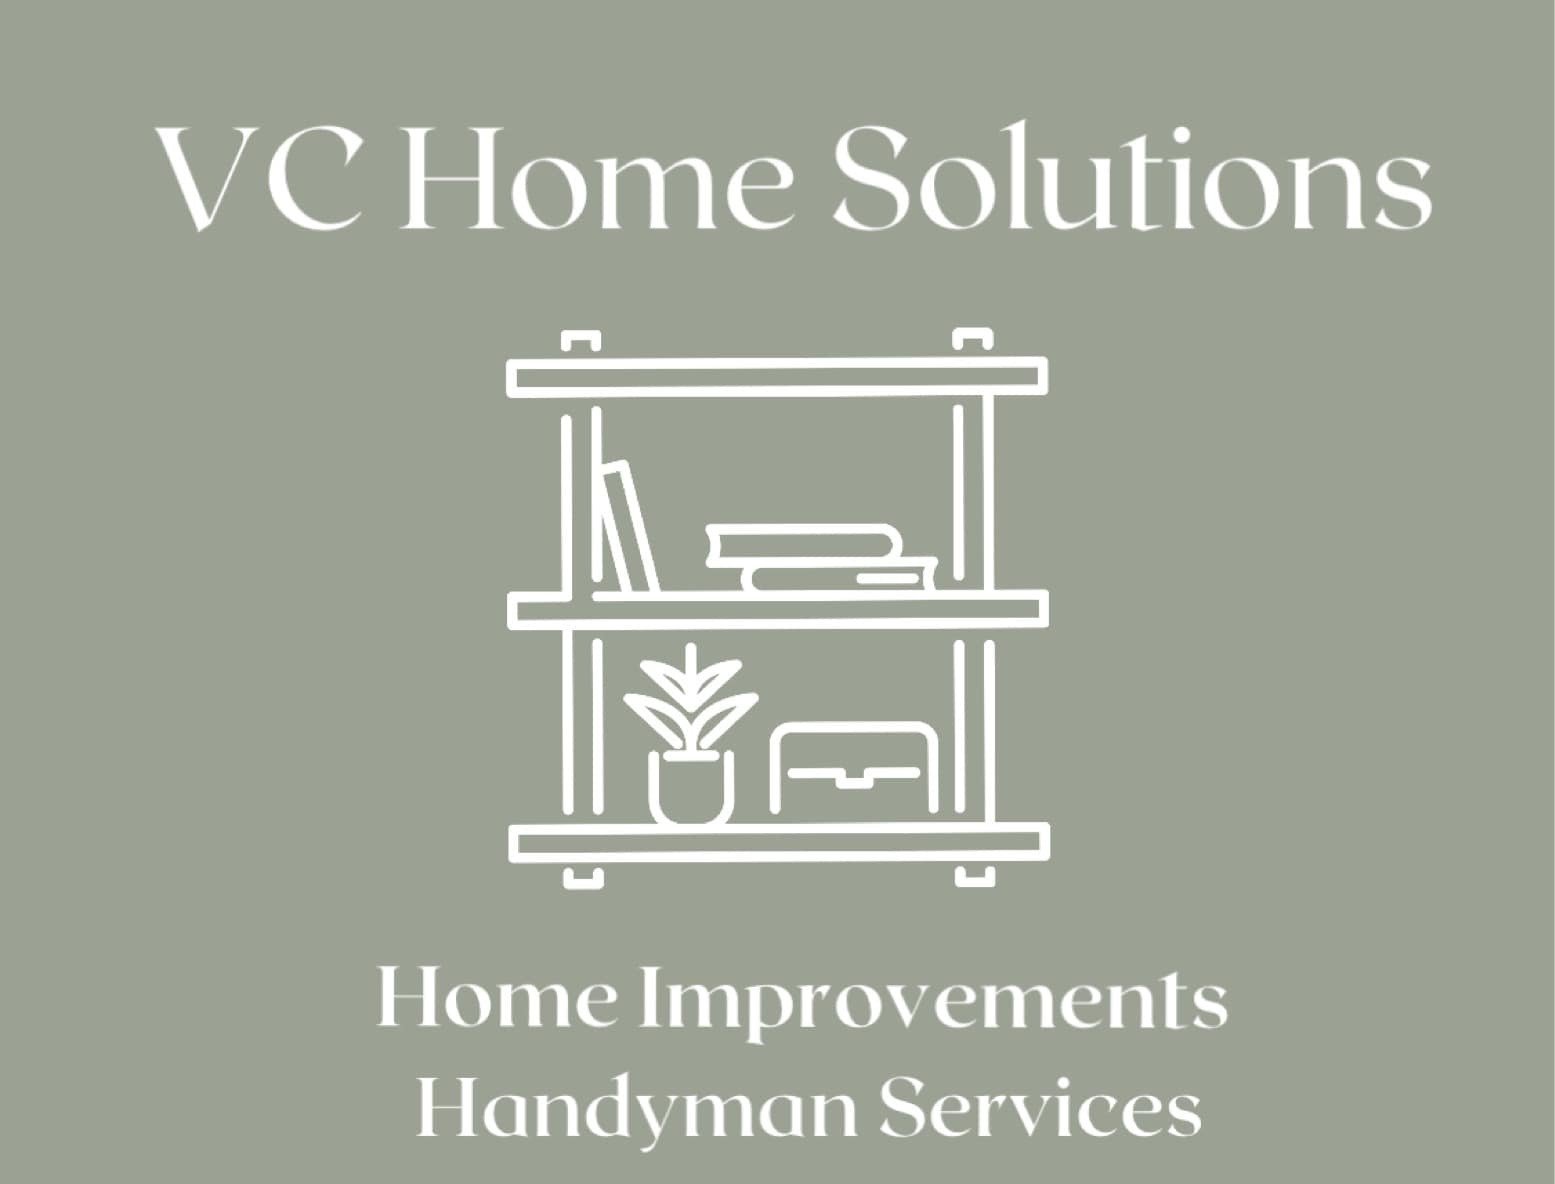 Home improvements garden - VC Home Solutions